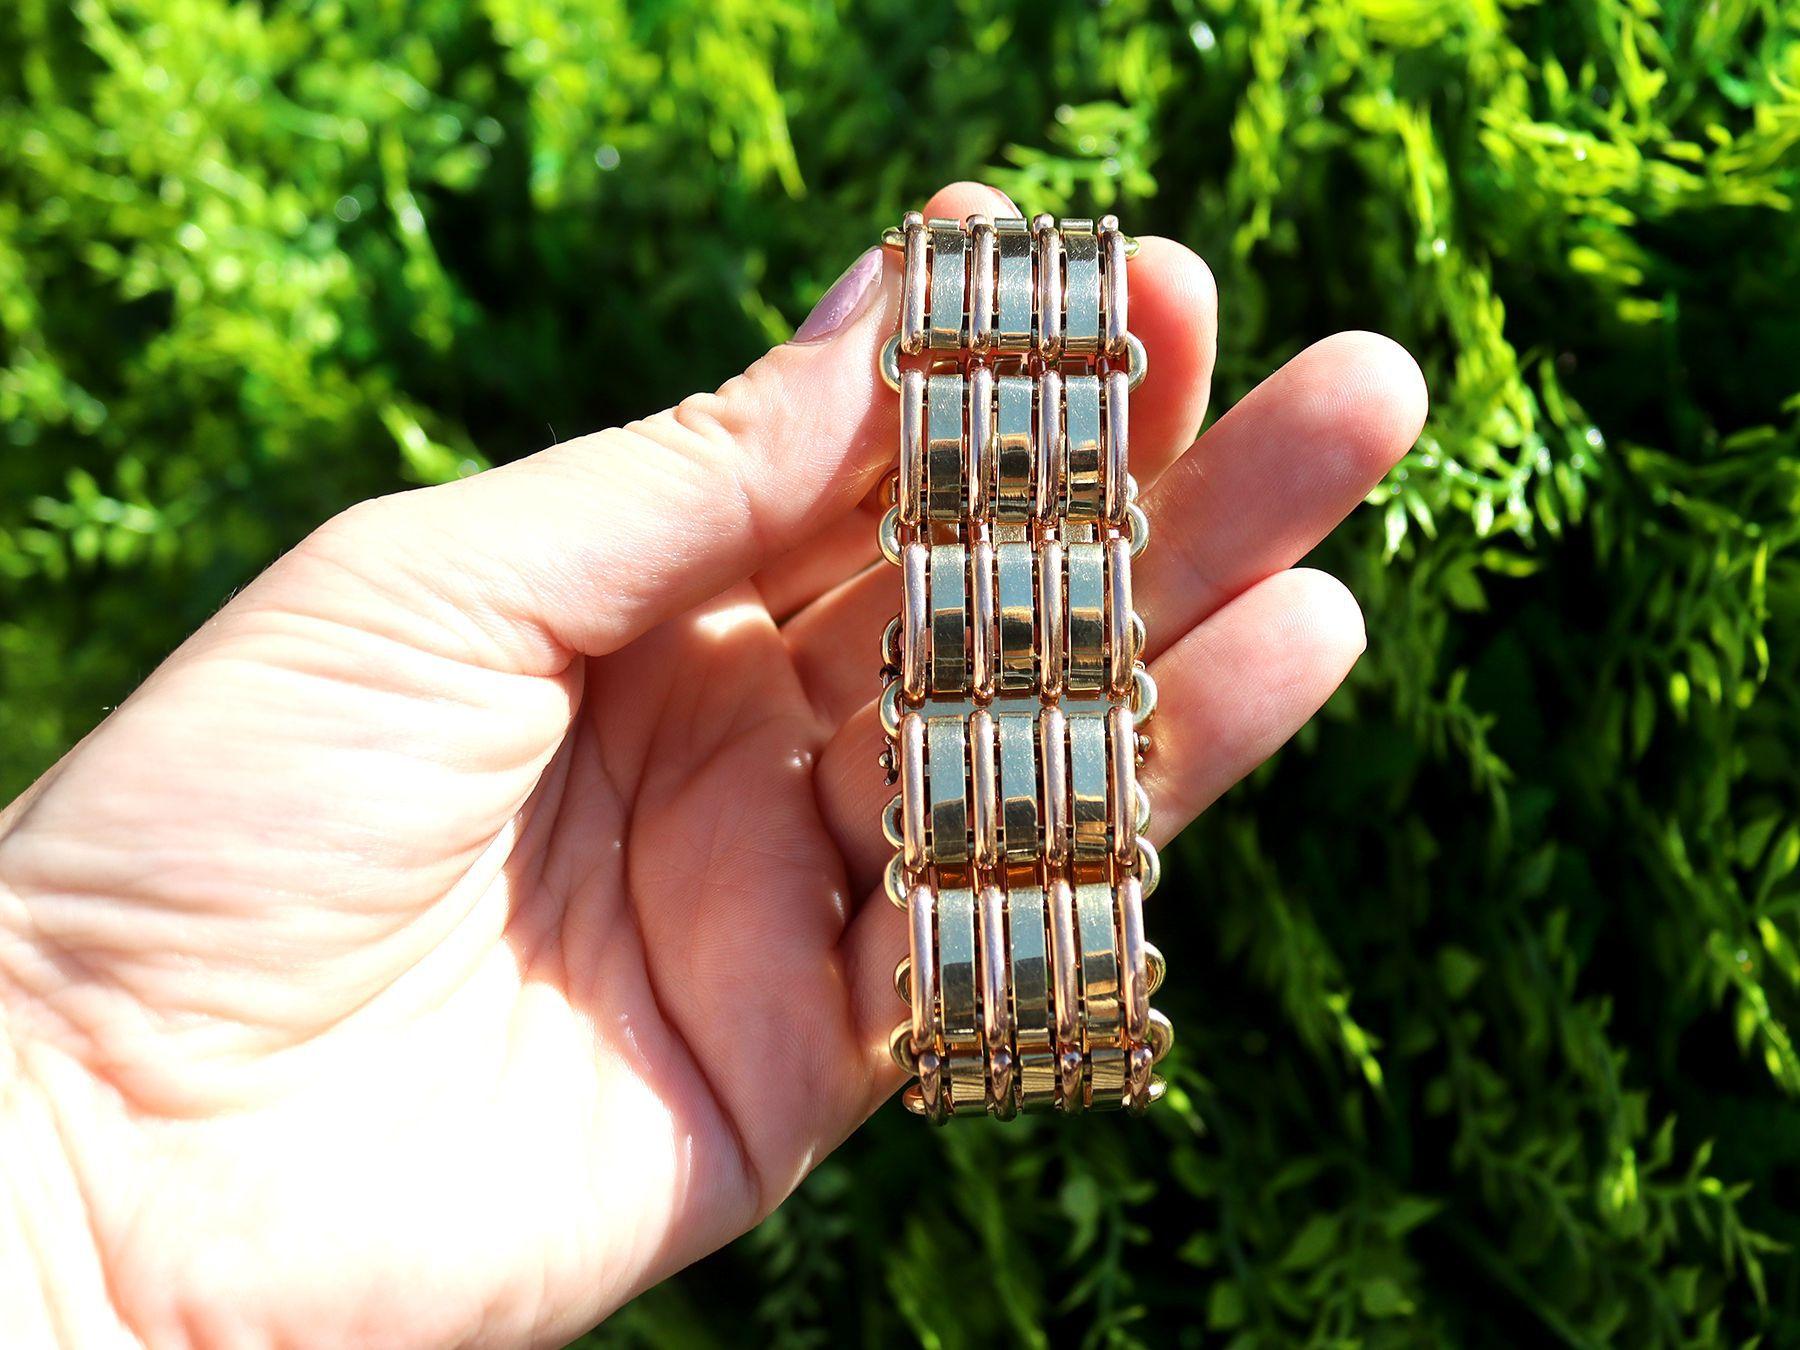 A stunning vintage Art Deco style 14 carat rose gold and 14 carat yellow gold bracelet; part of our diverse Art Deco jewellery and estate jewelry collections

This stunning, fine and impressive rose and yellow gold bracelet has been crafted in 14ct